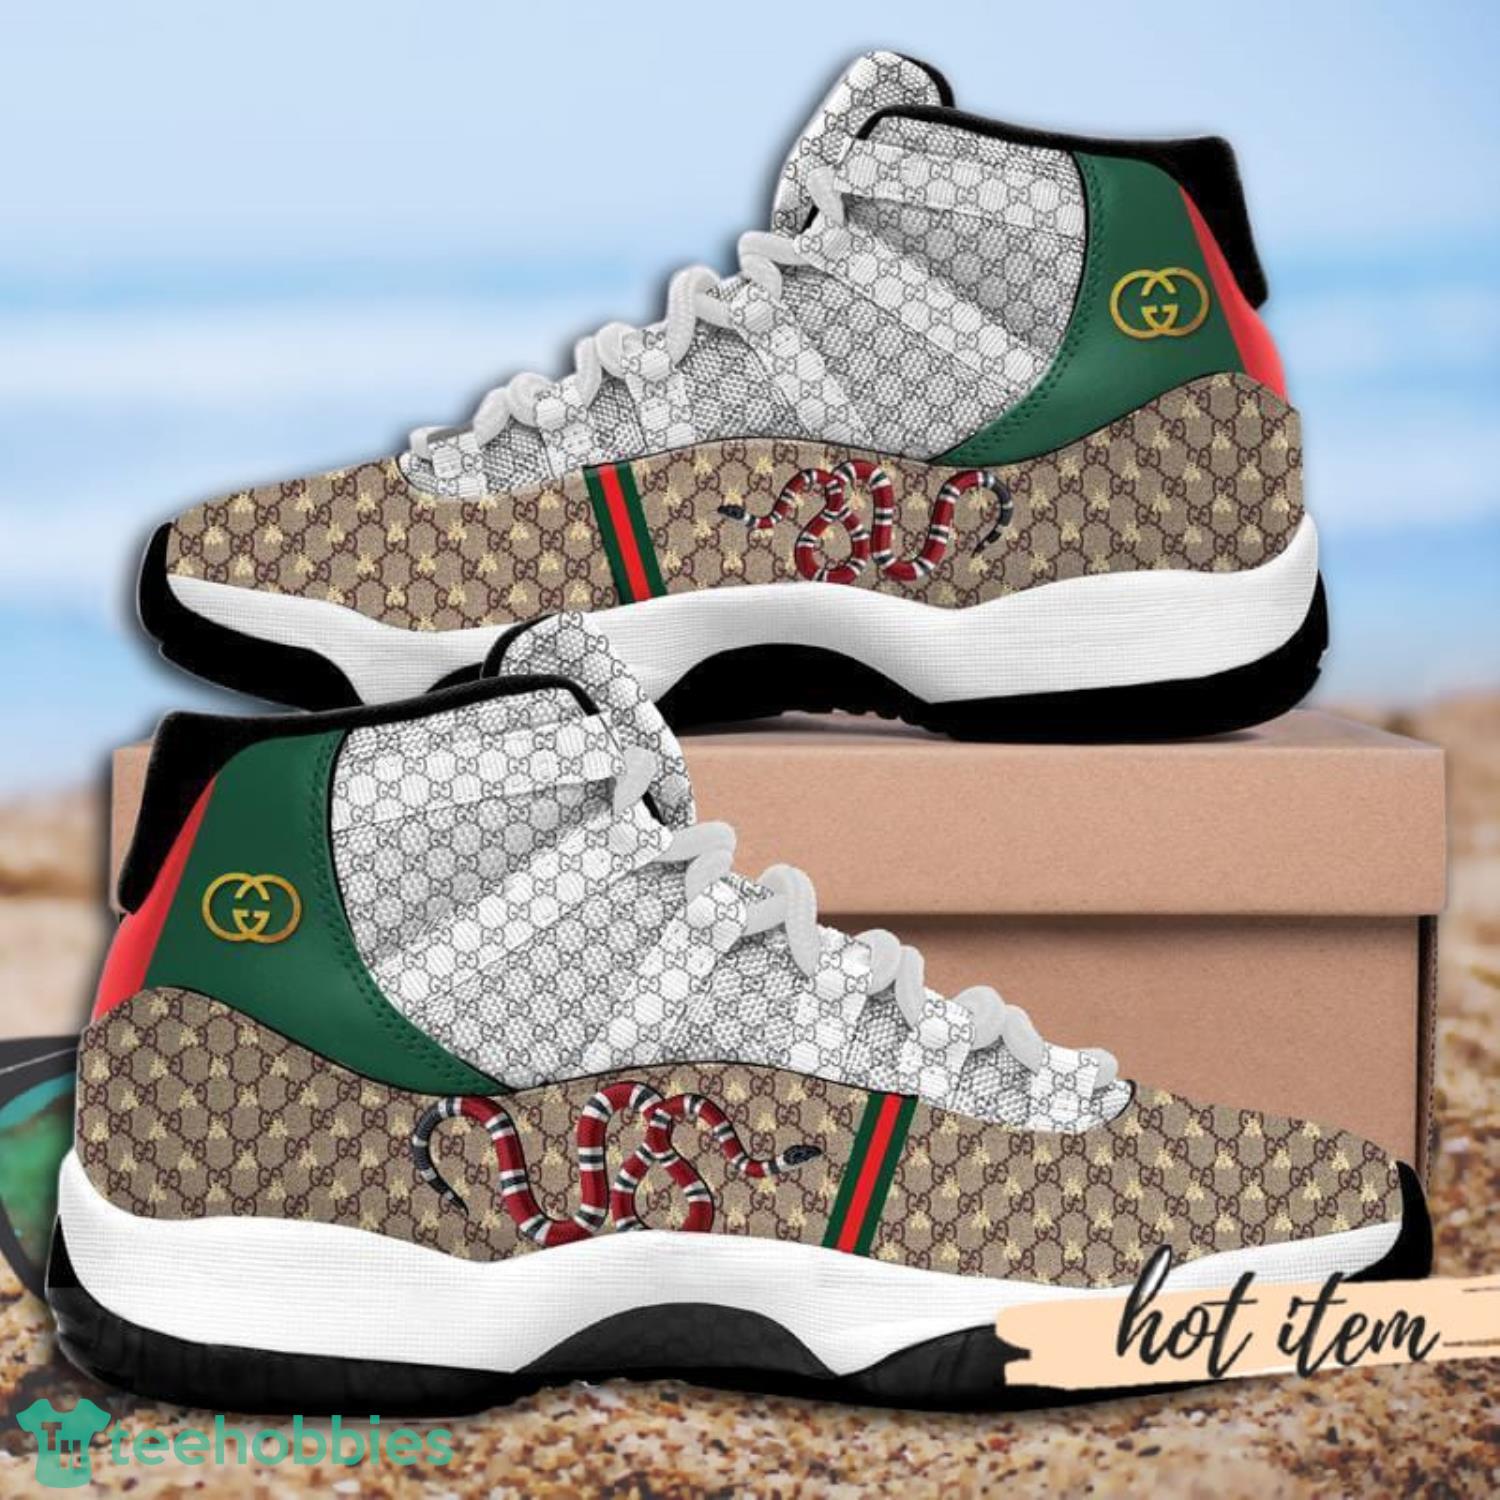 Luxury Gucci Snake Air Jordan 11 Shoes Gucci Sneakers Gifts For Men Women